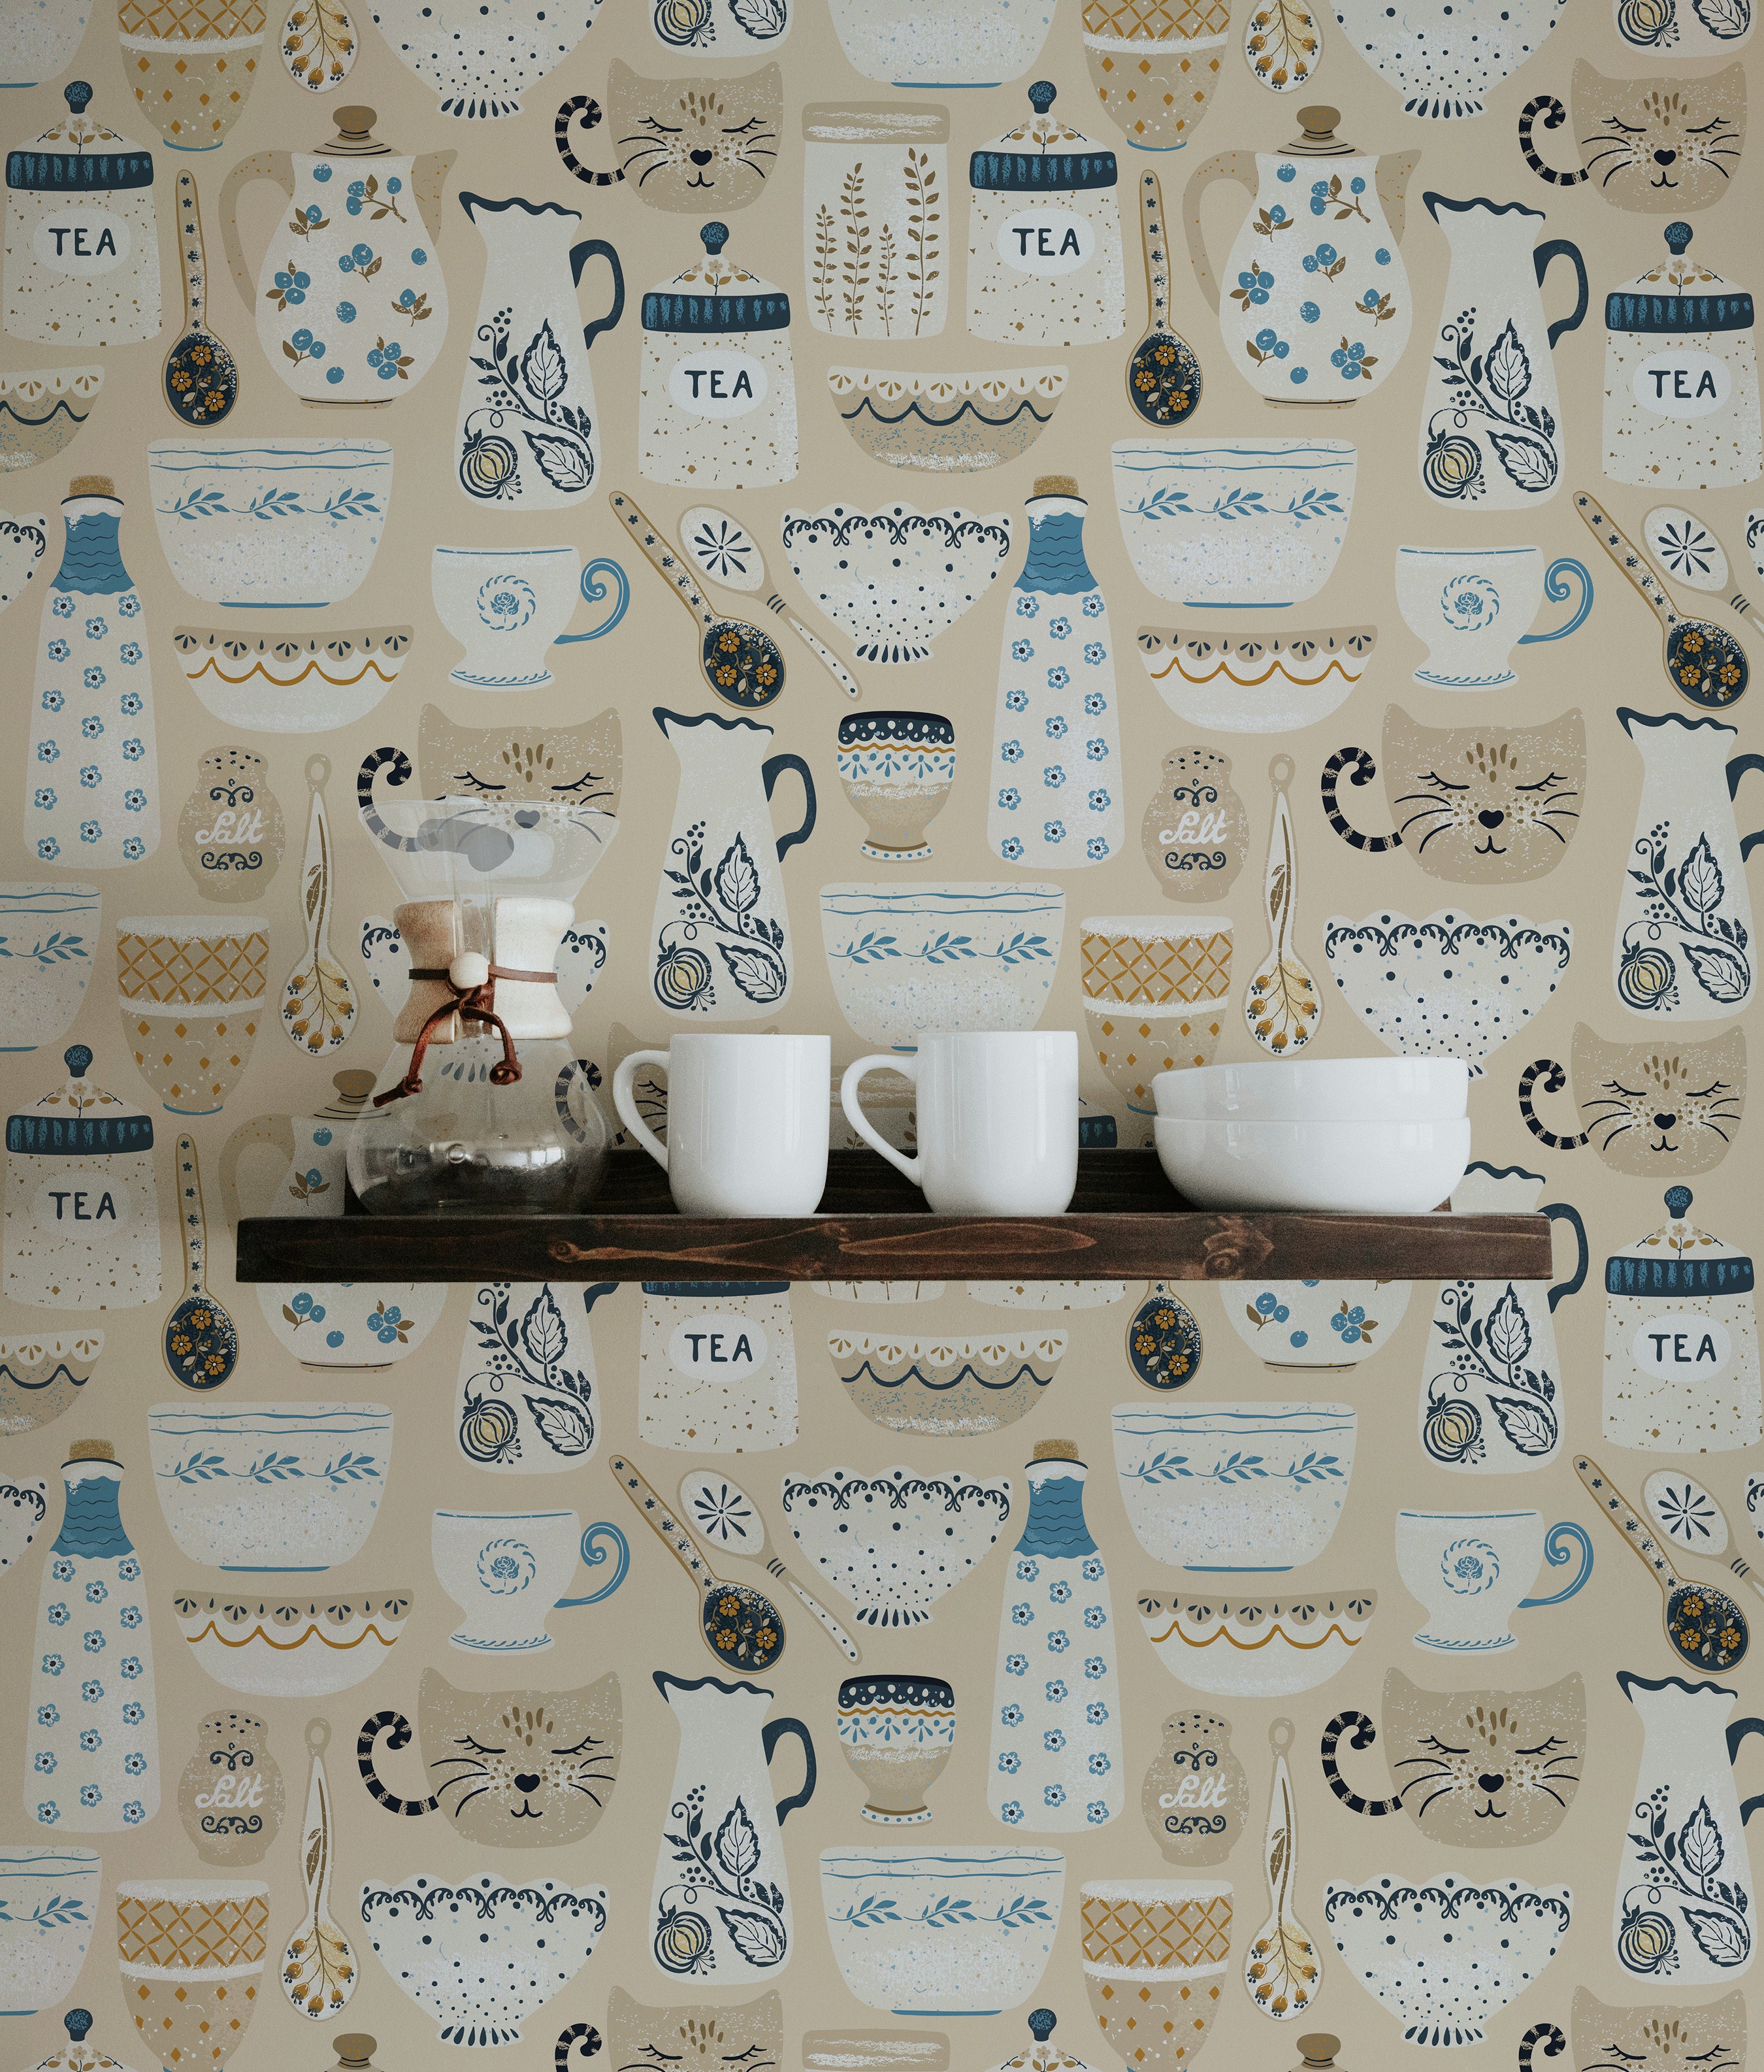 A kitchen setting featuring a wall covered in 'Spring Ceramics Wallpaper'. The wallpaper includes decorative elements like teapots, cups, and floral designs in a pastel color scheme. The scene is complemented by rustic wooden shelves displaying various kitchen items, creating a homely and inviting space.